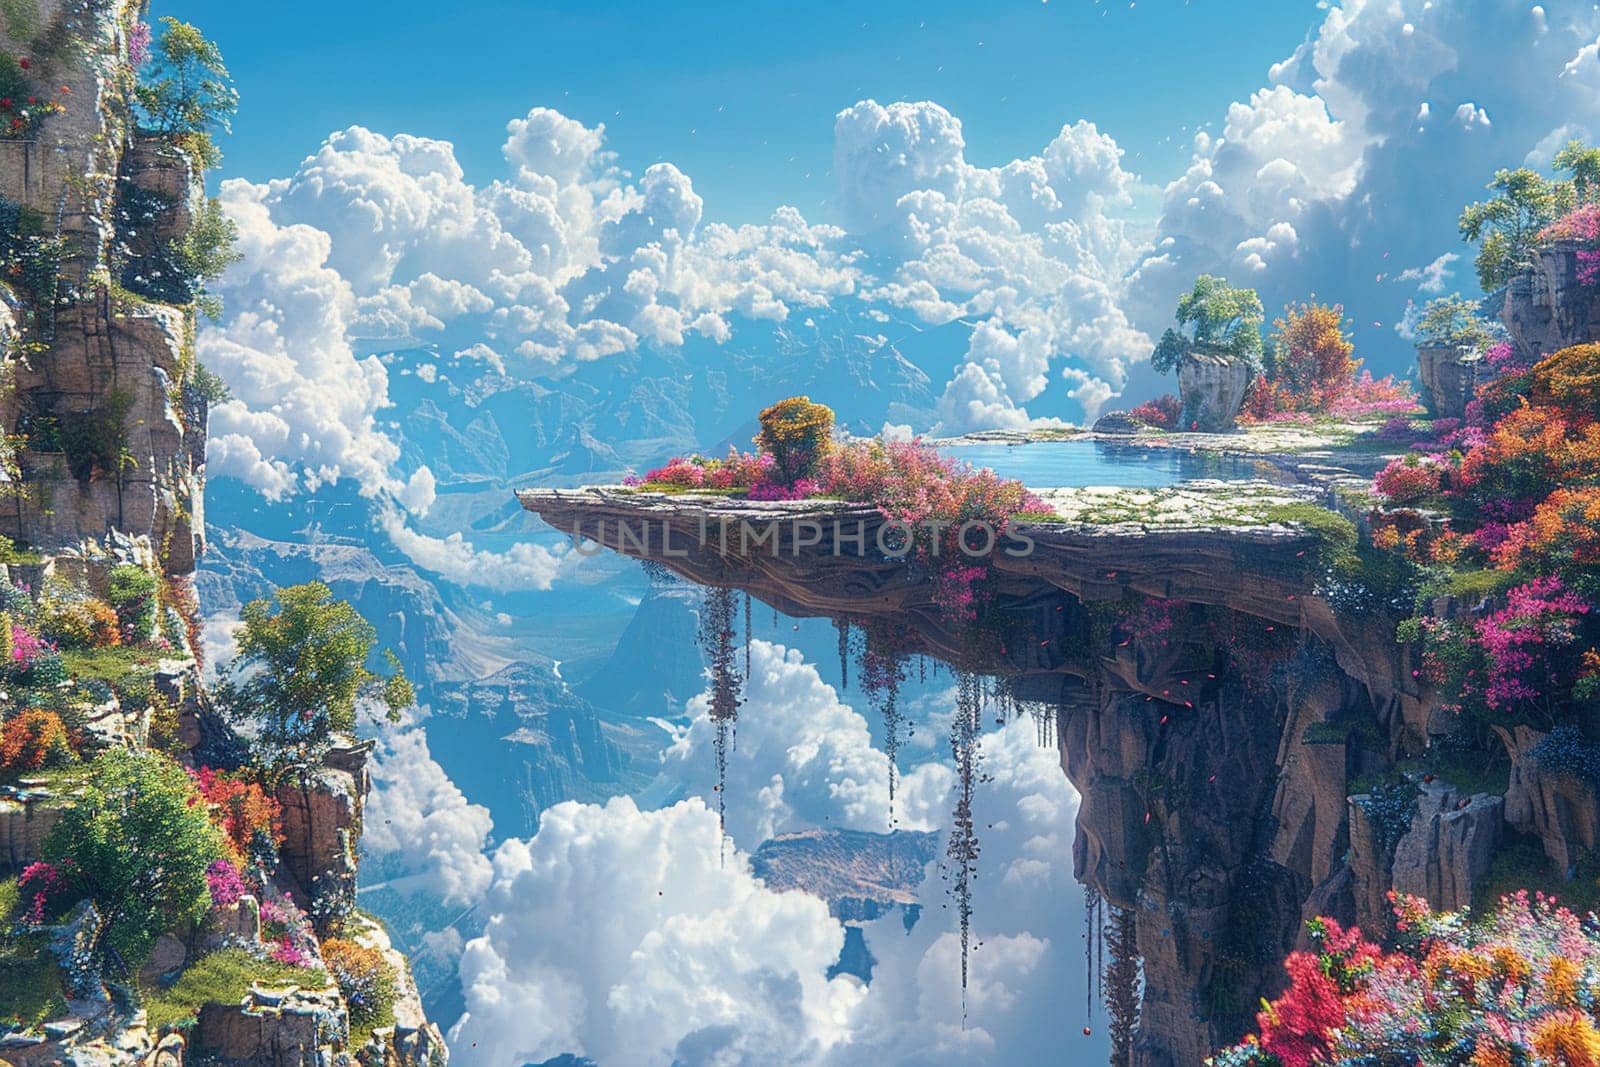 Alien landscape with floating rocks and vibrant flora, rendered in a surrealistic and imaginative style.